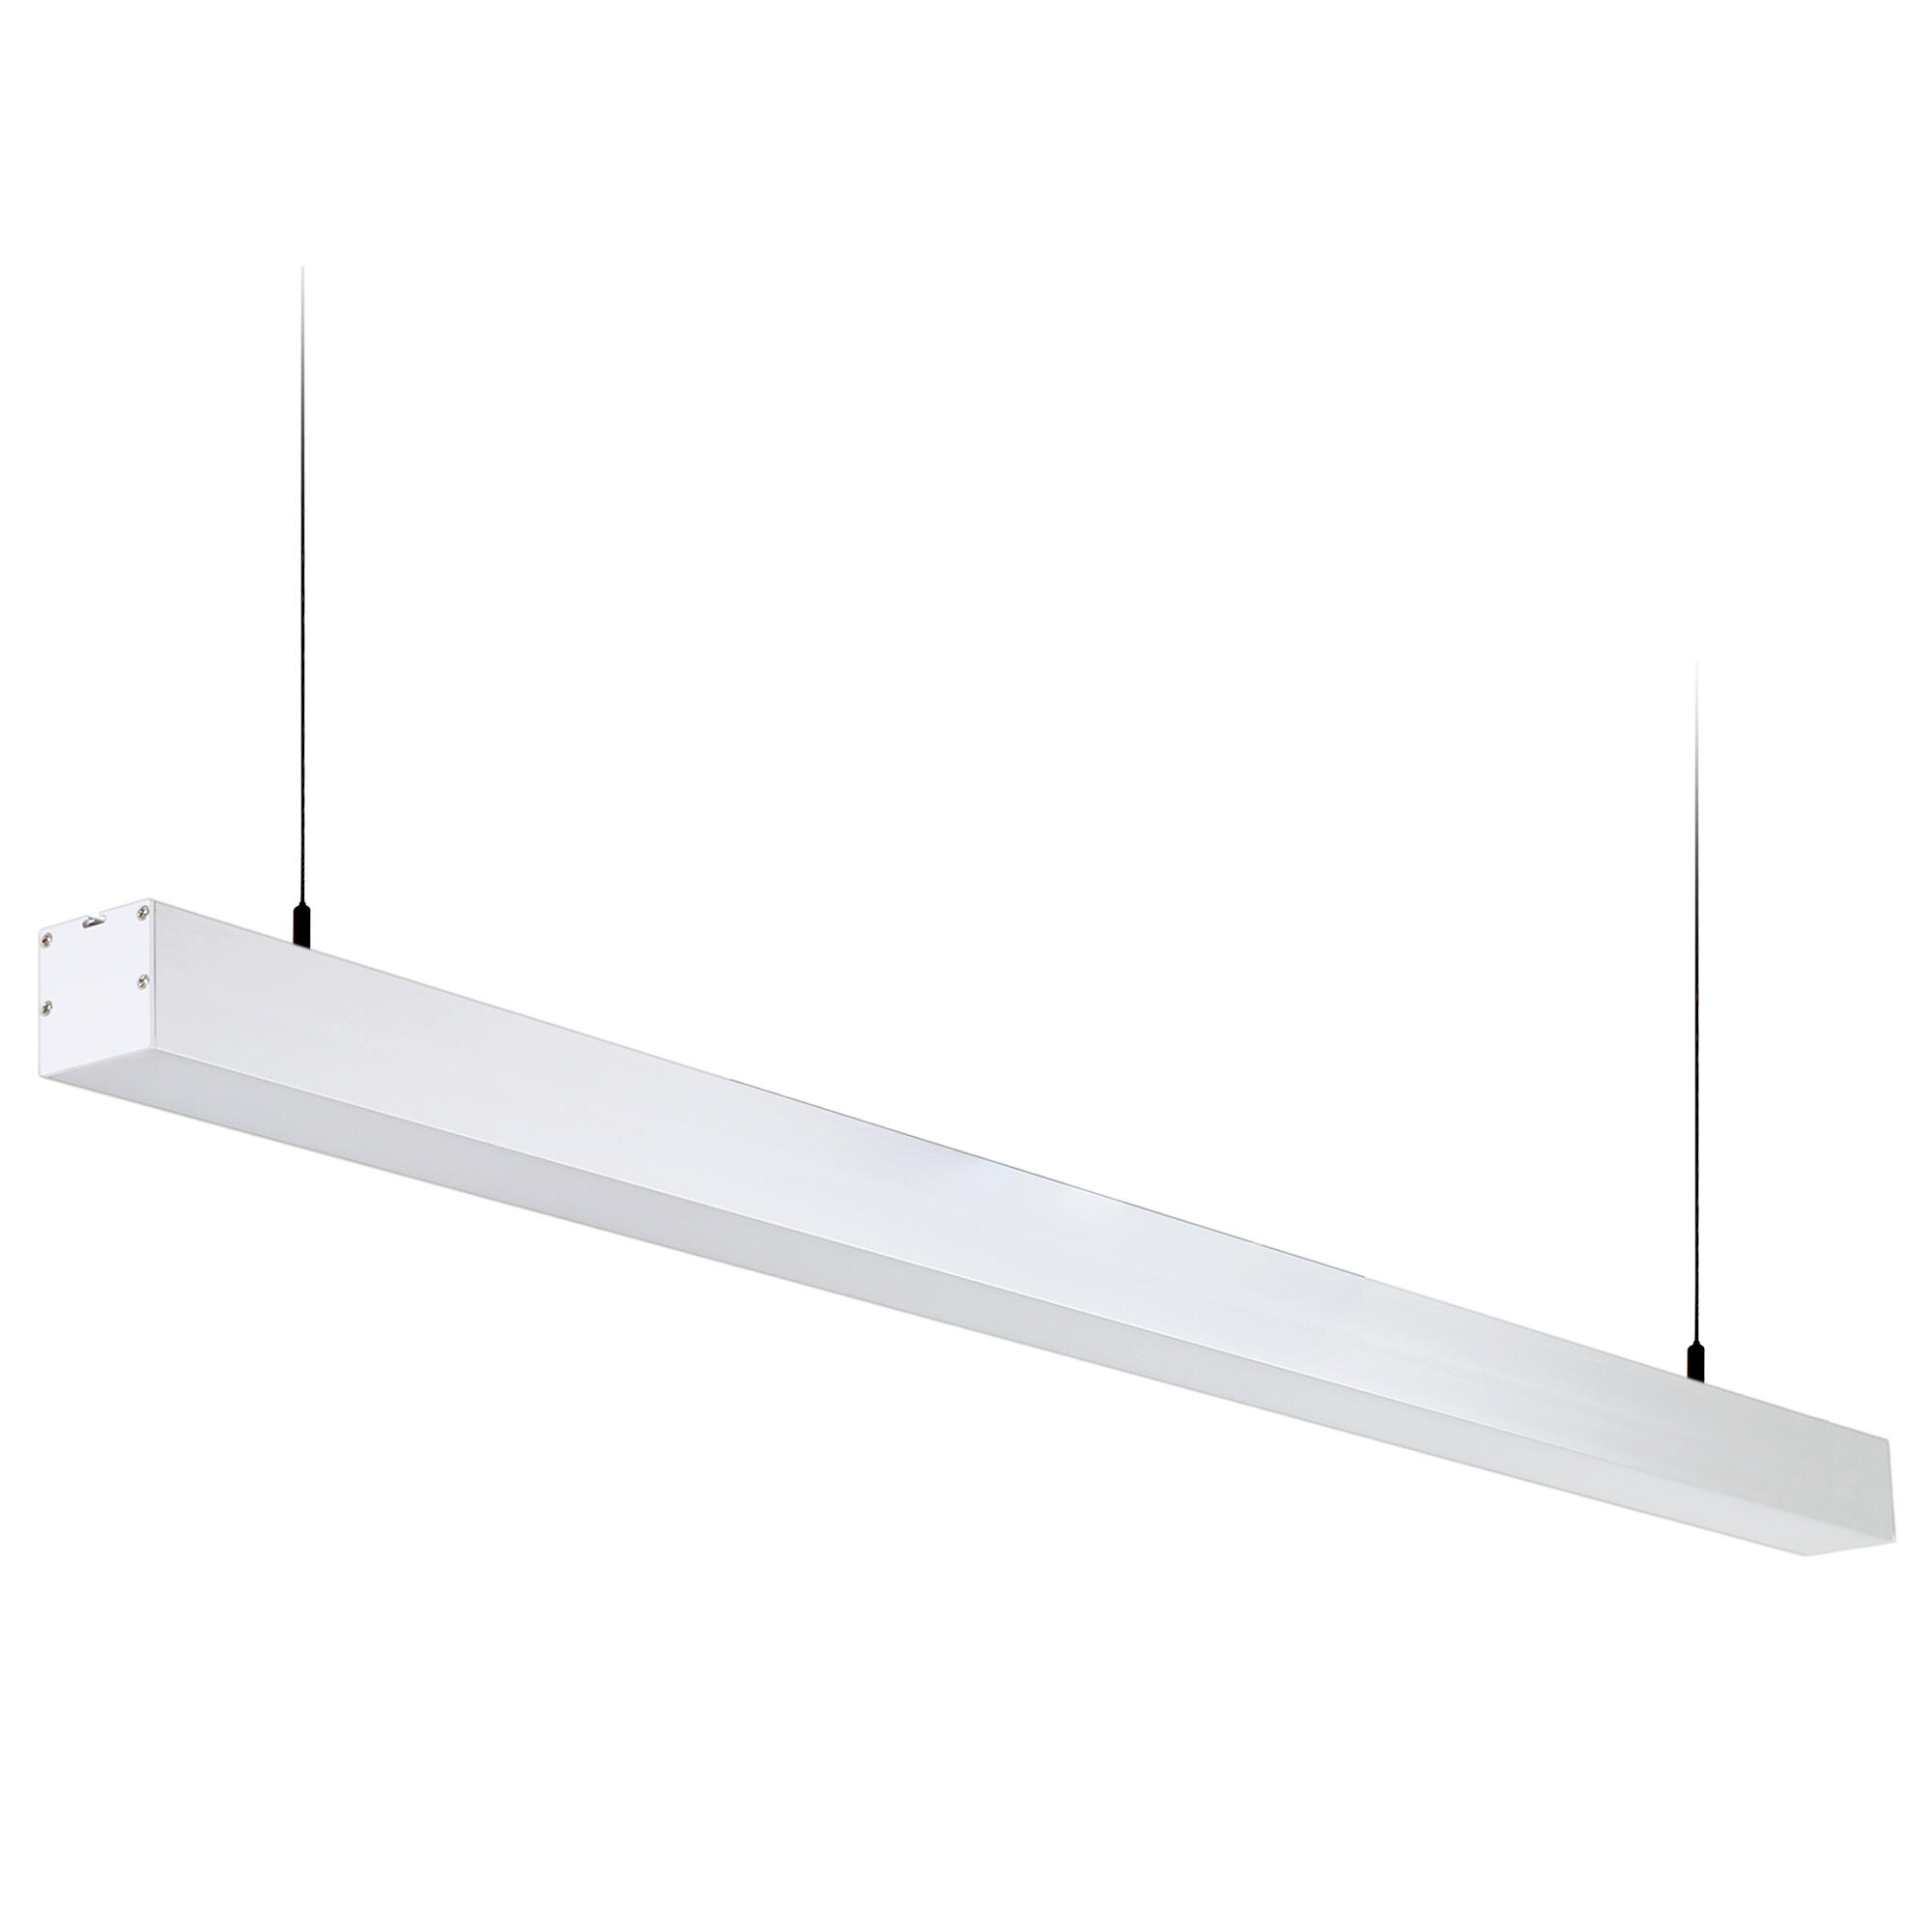 Luminaria led lineal 4270lm 4000k gris